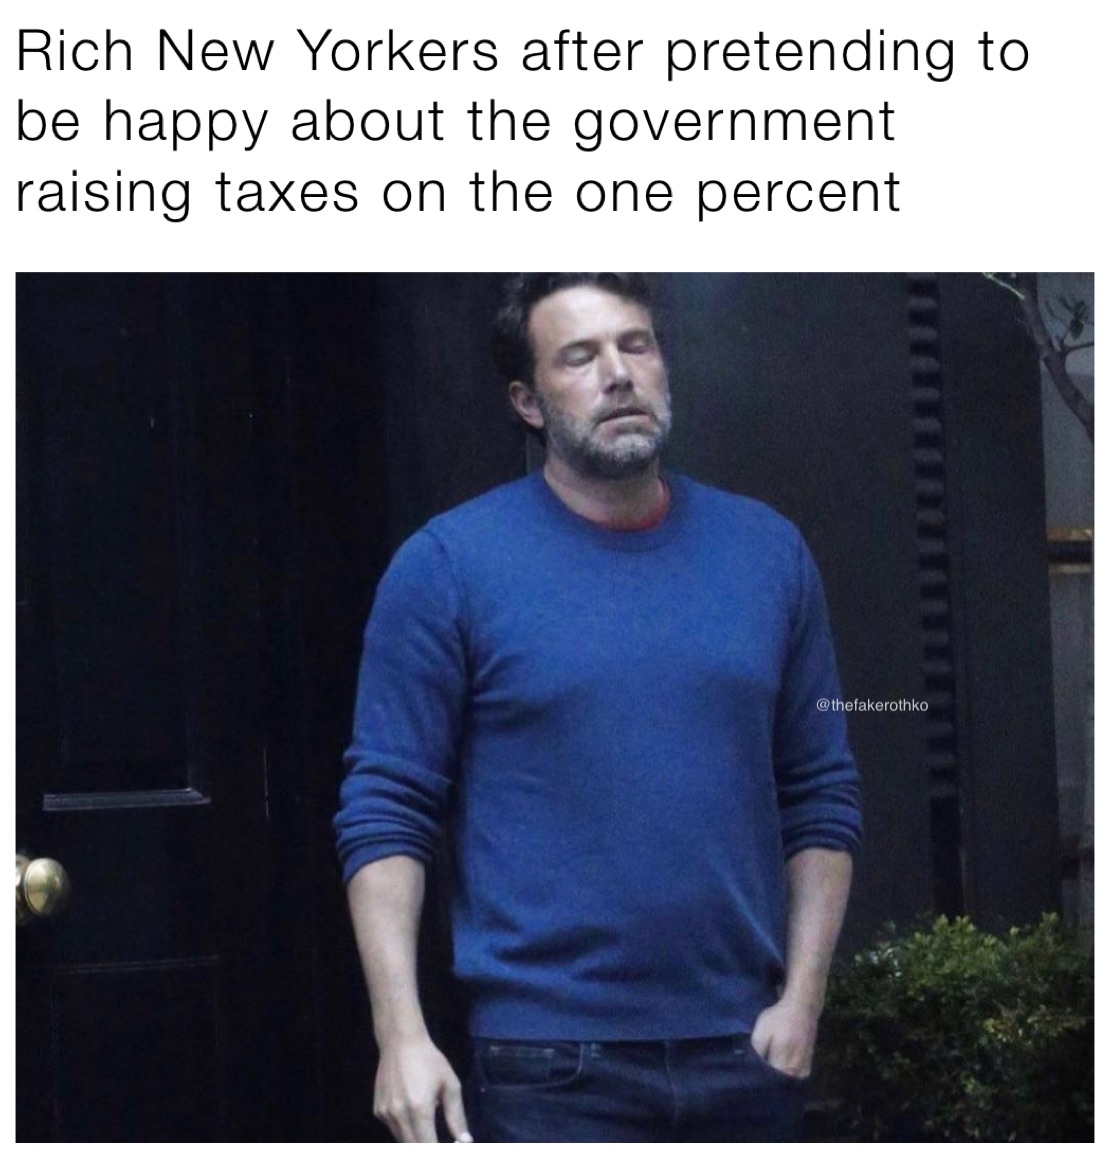 Rich New Yorkers after pretending to be happy about the government raising taxes on the one percent